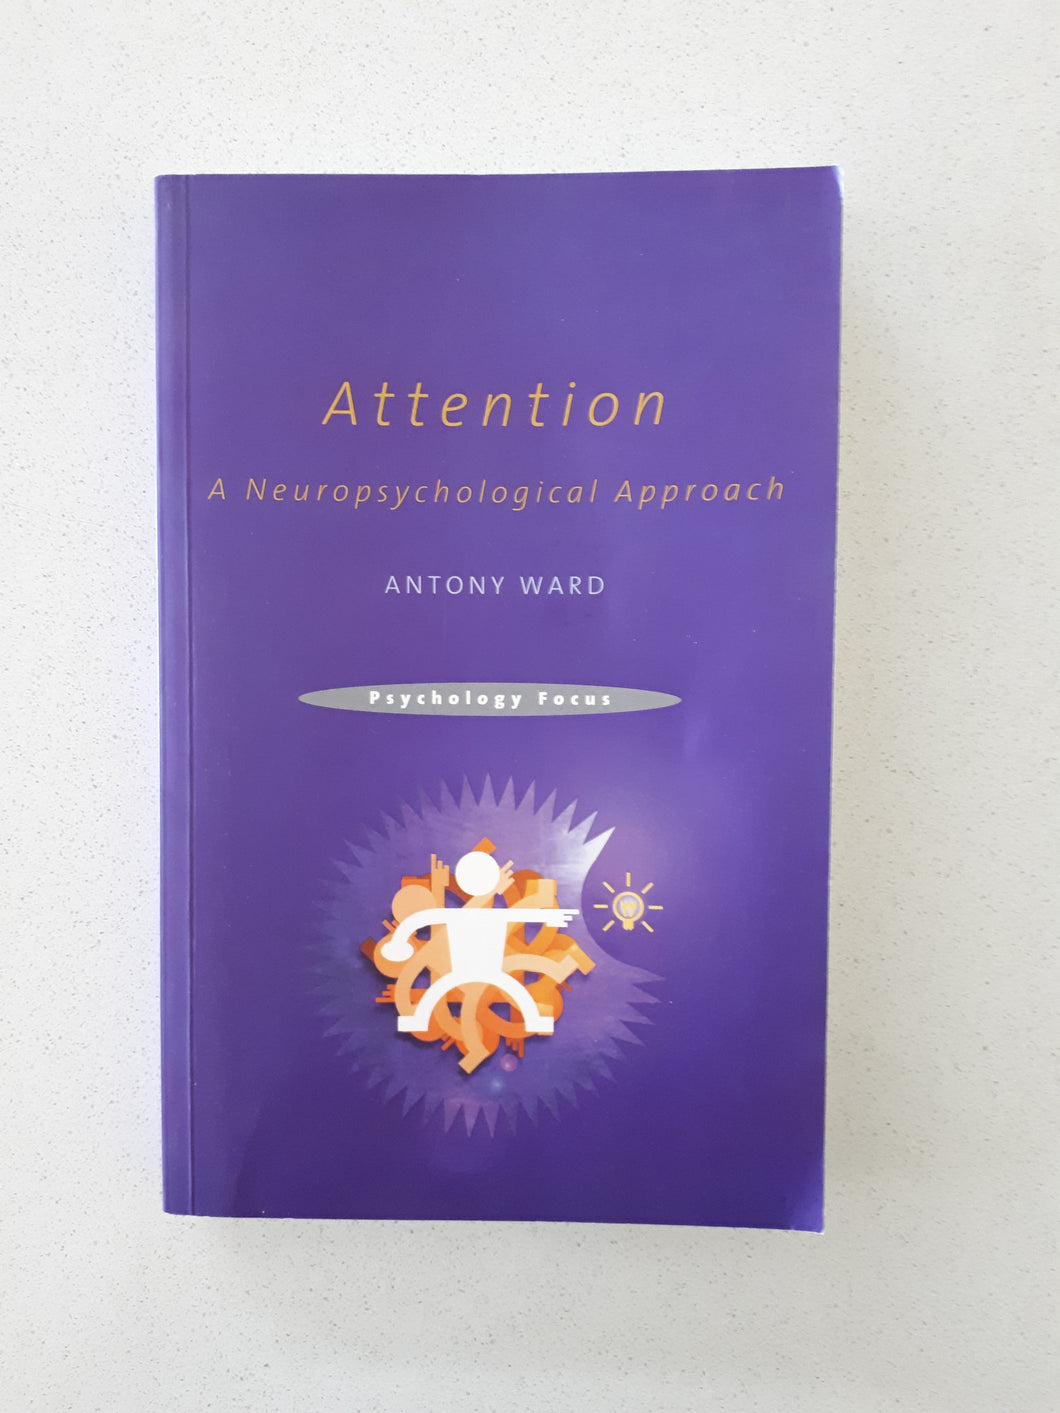 Attention: A Cognitive Neuropsychological Approach by Tony Ward